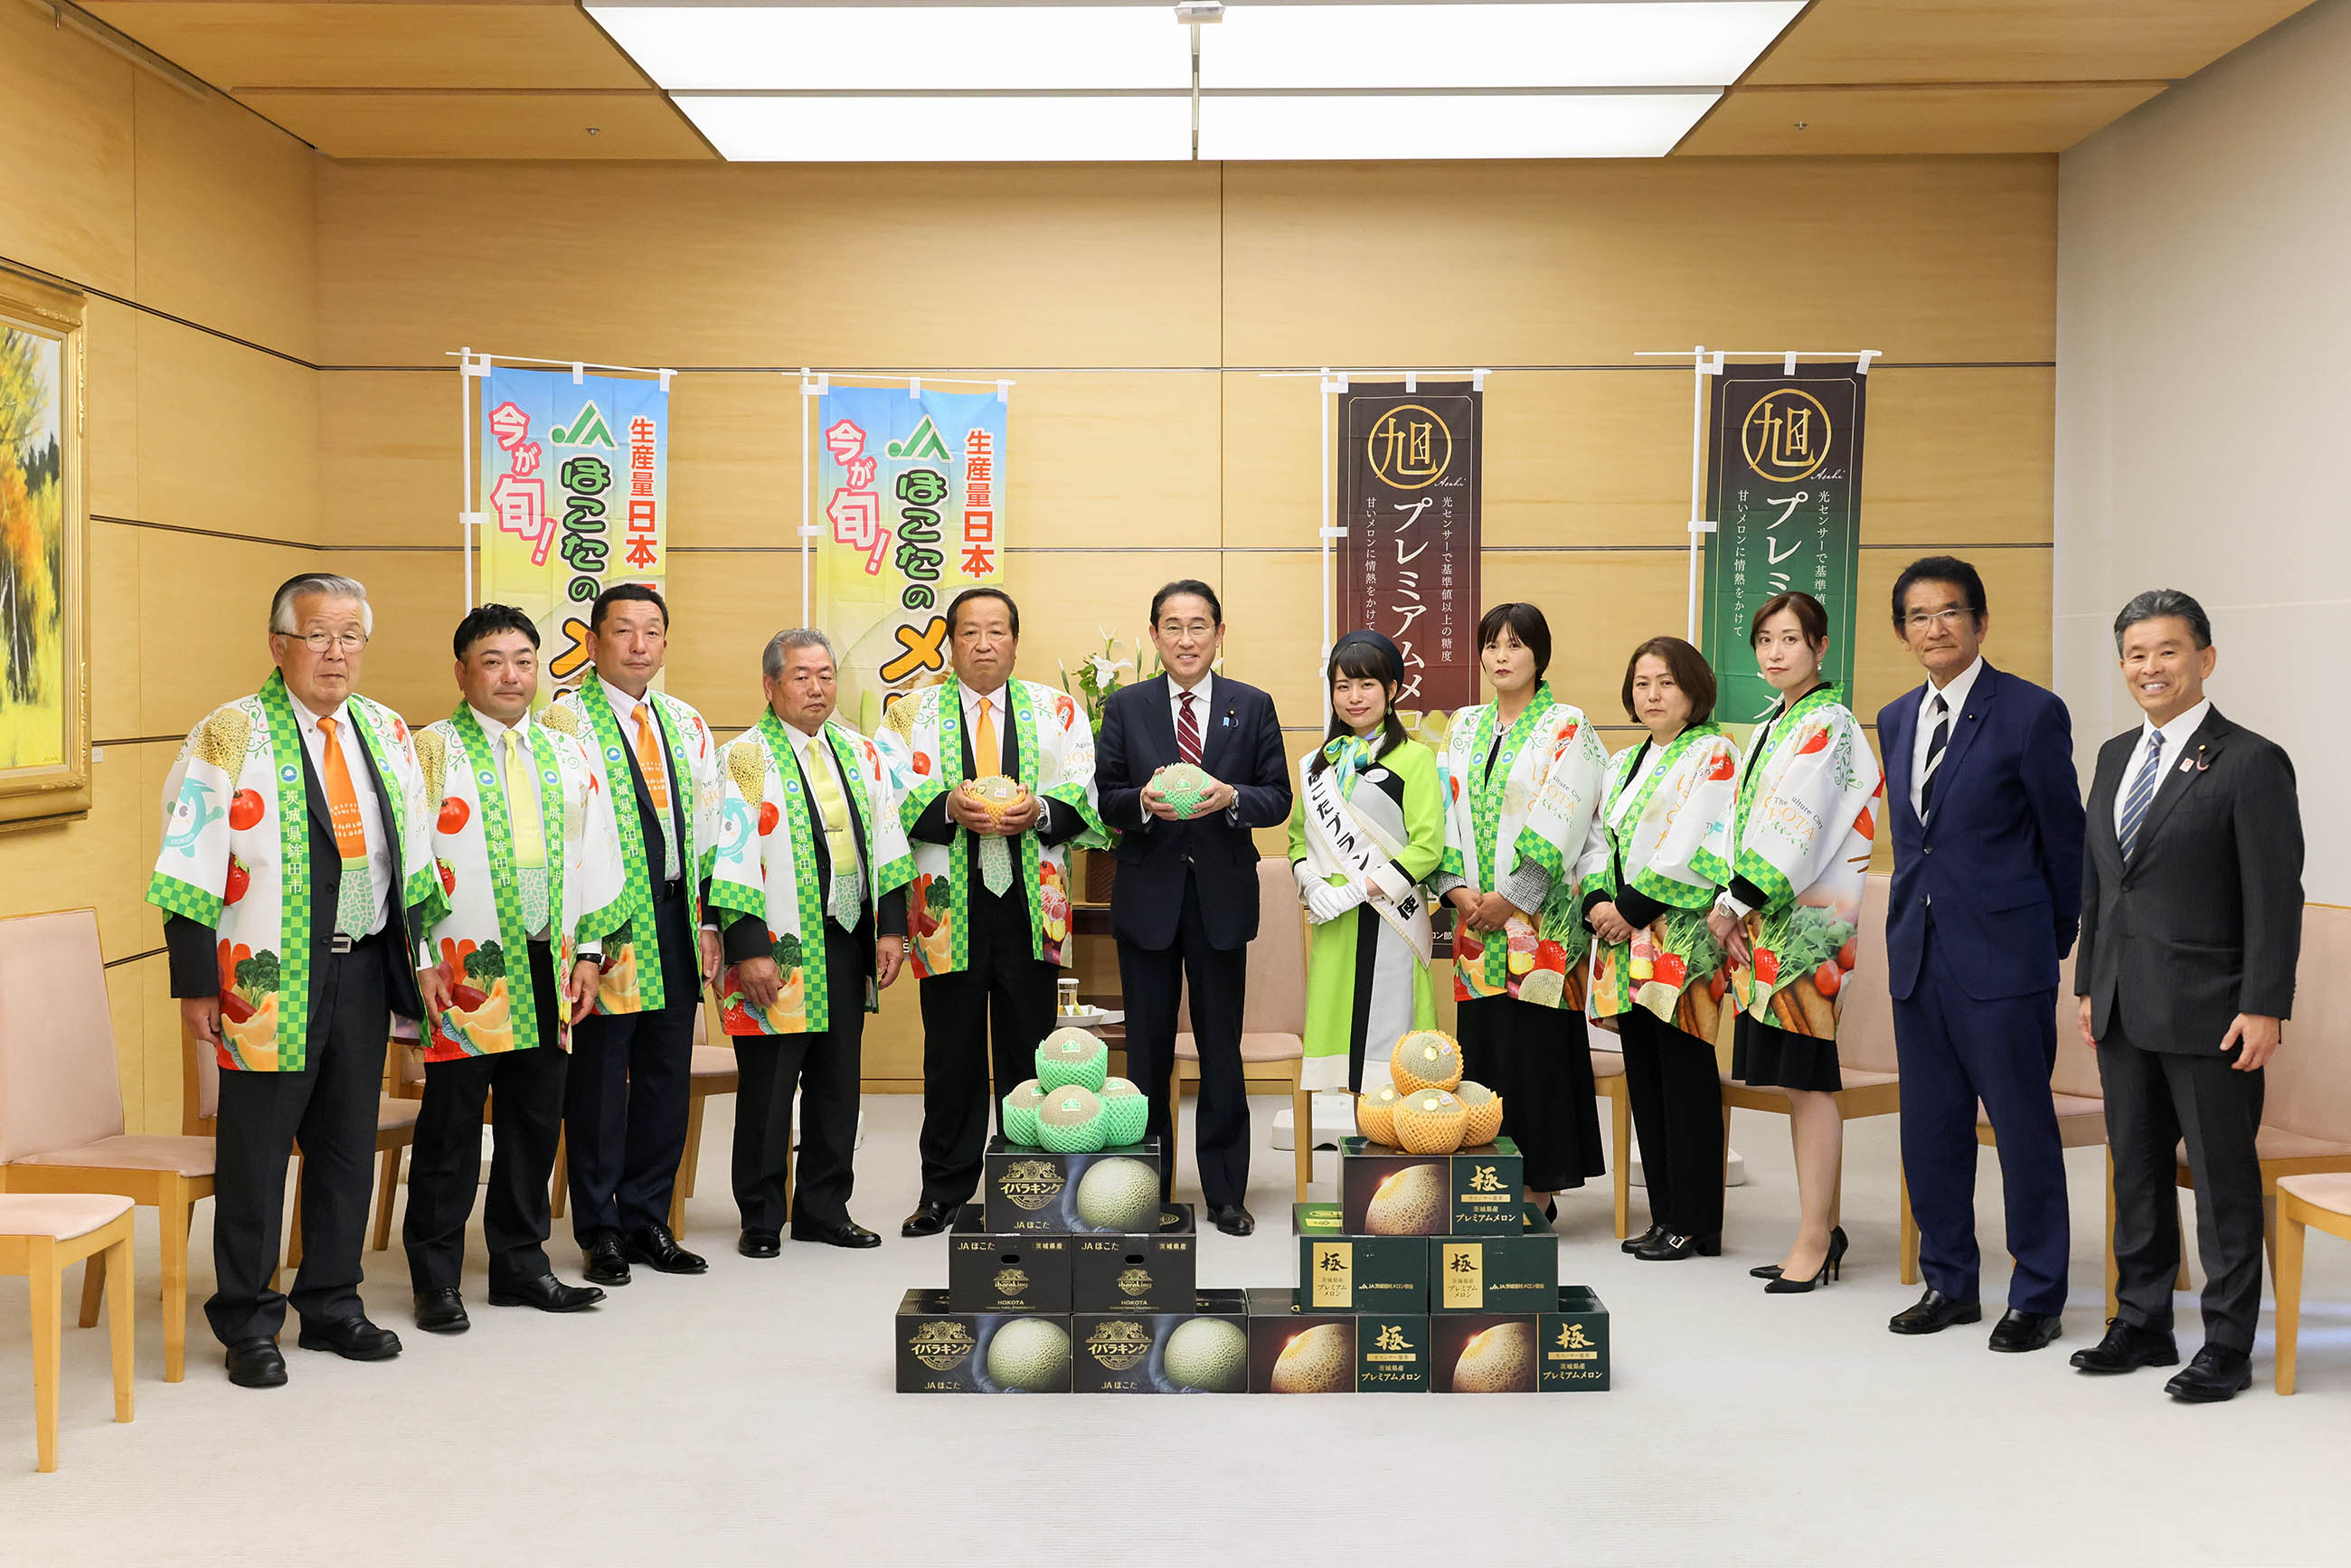 Prime Minister Kishida being presented with melons (1)